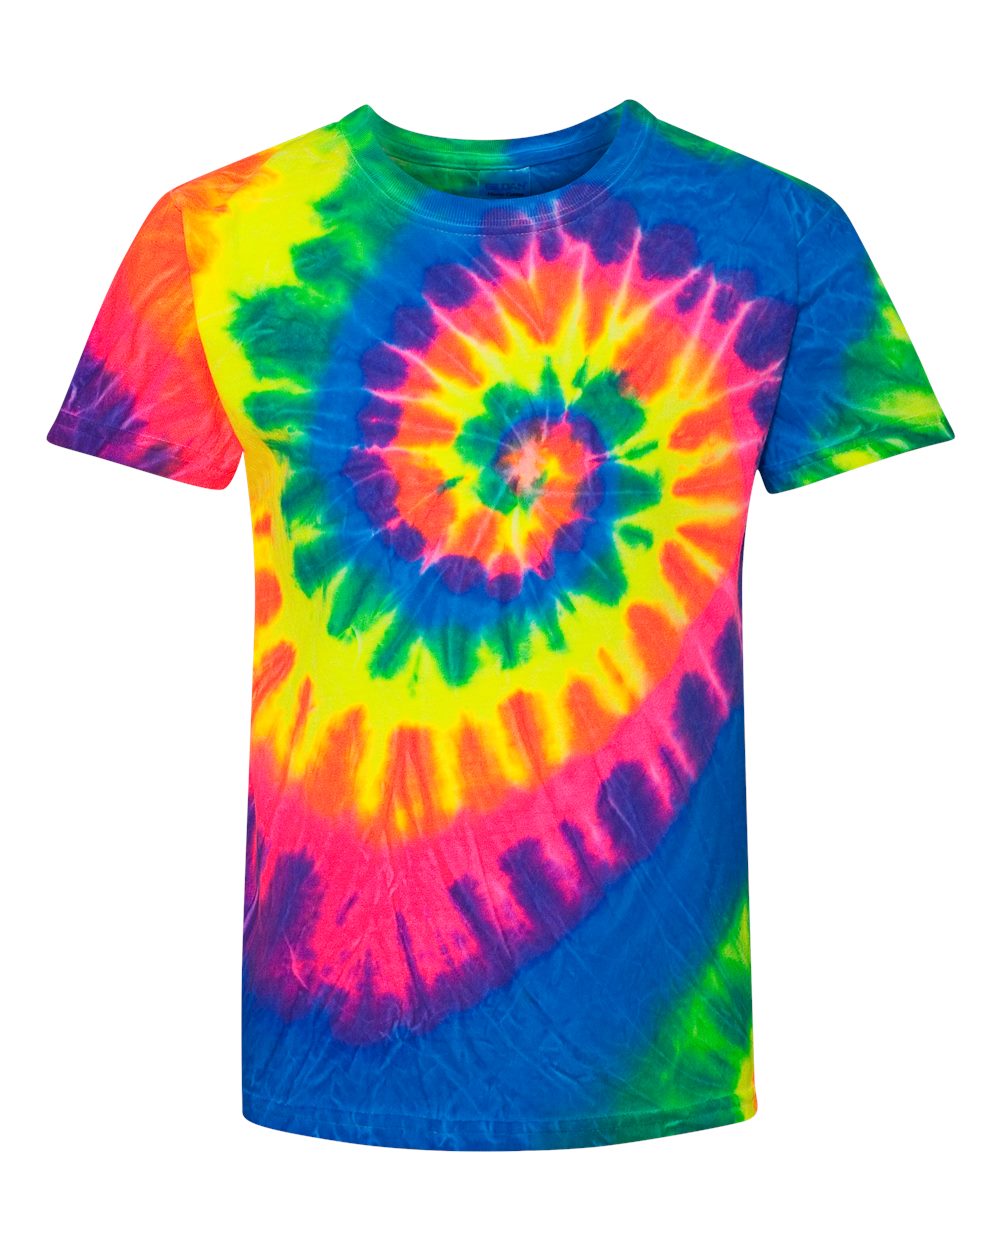 Youth Tie Dye S/S Blue Jerry - Salty Dog T-Shirt Factory